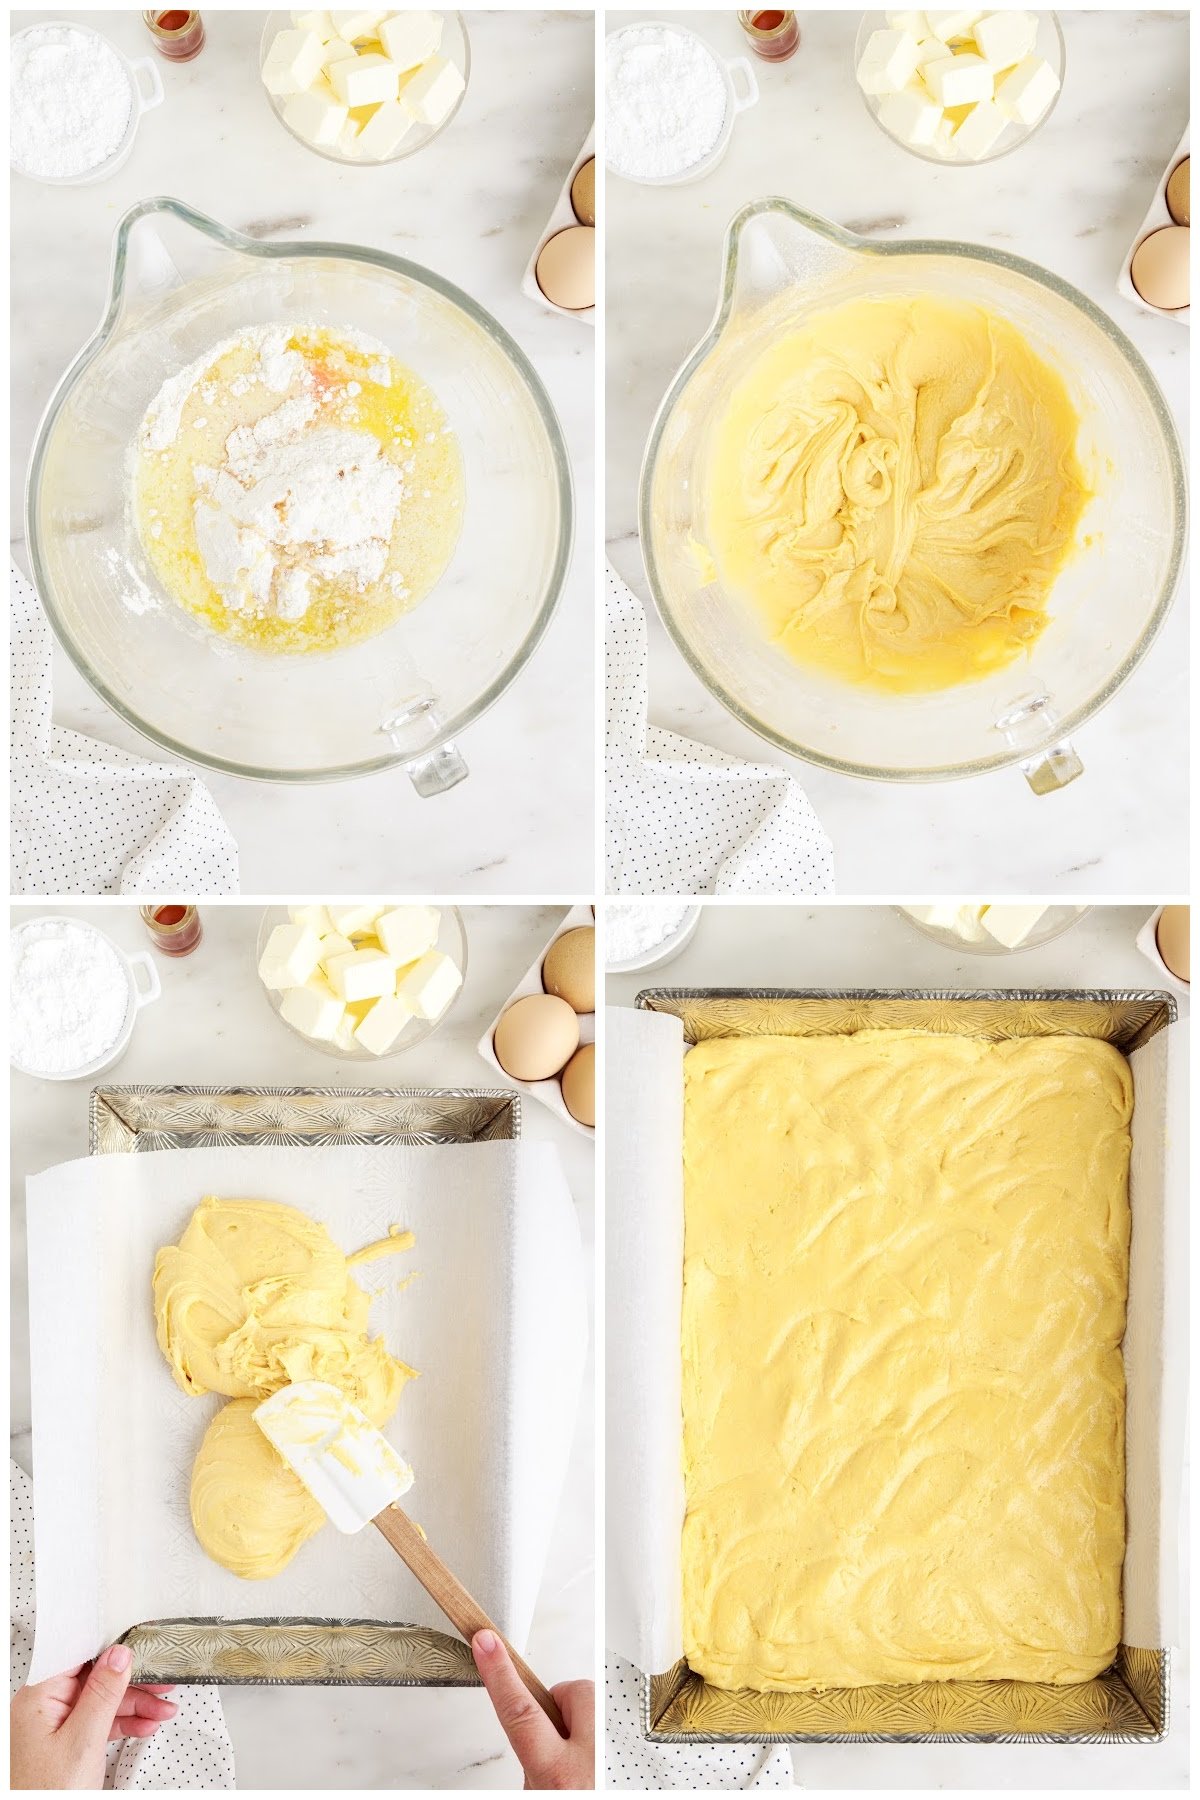 Four steps to being making the cake.  Mixing the boxed cake mix with other ingredients and pouring into a 13X9 baking dish.